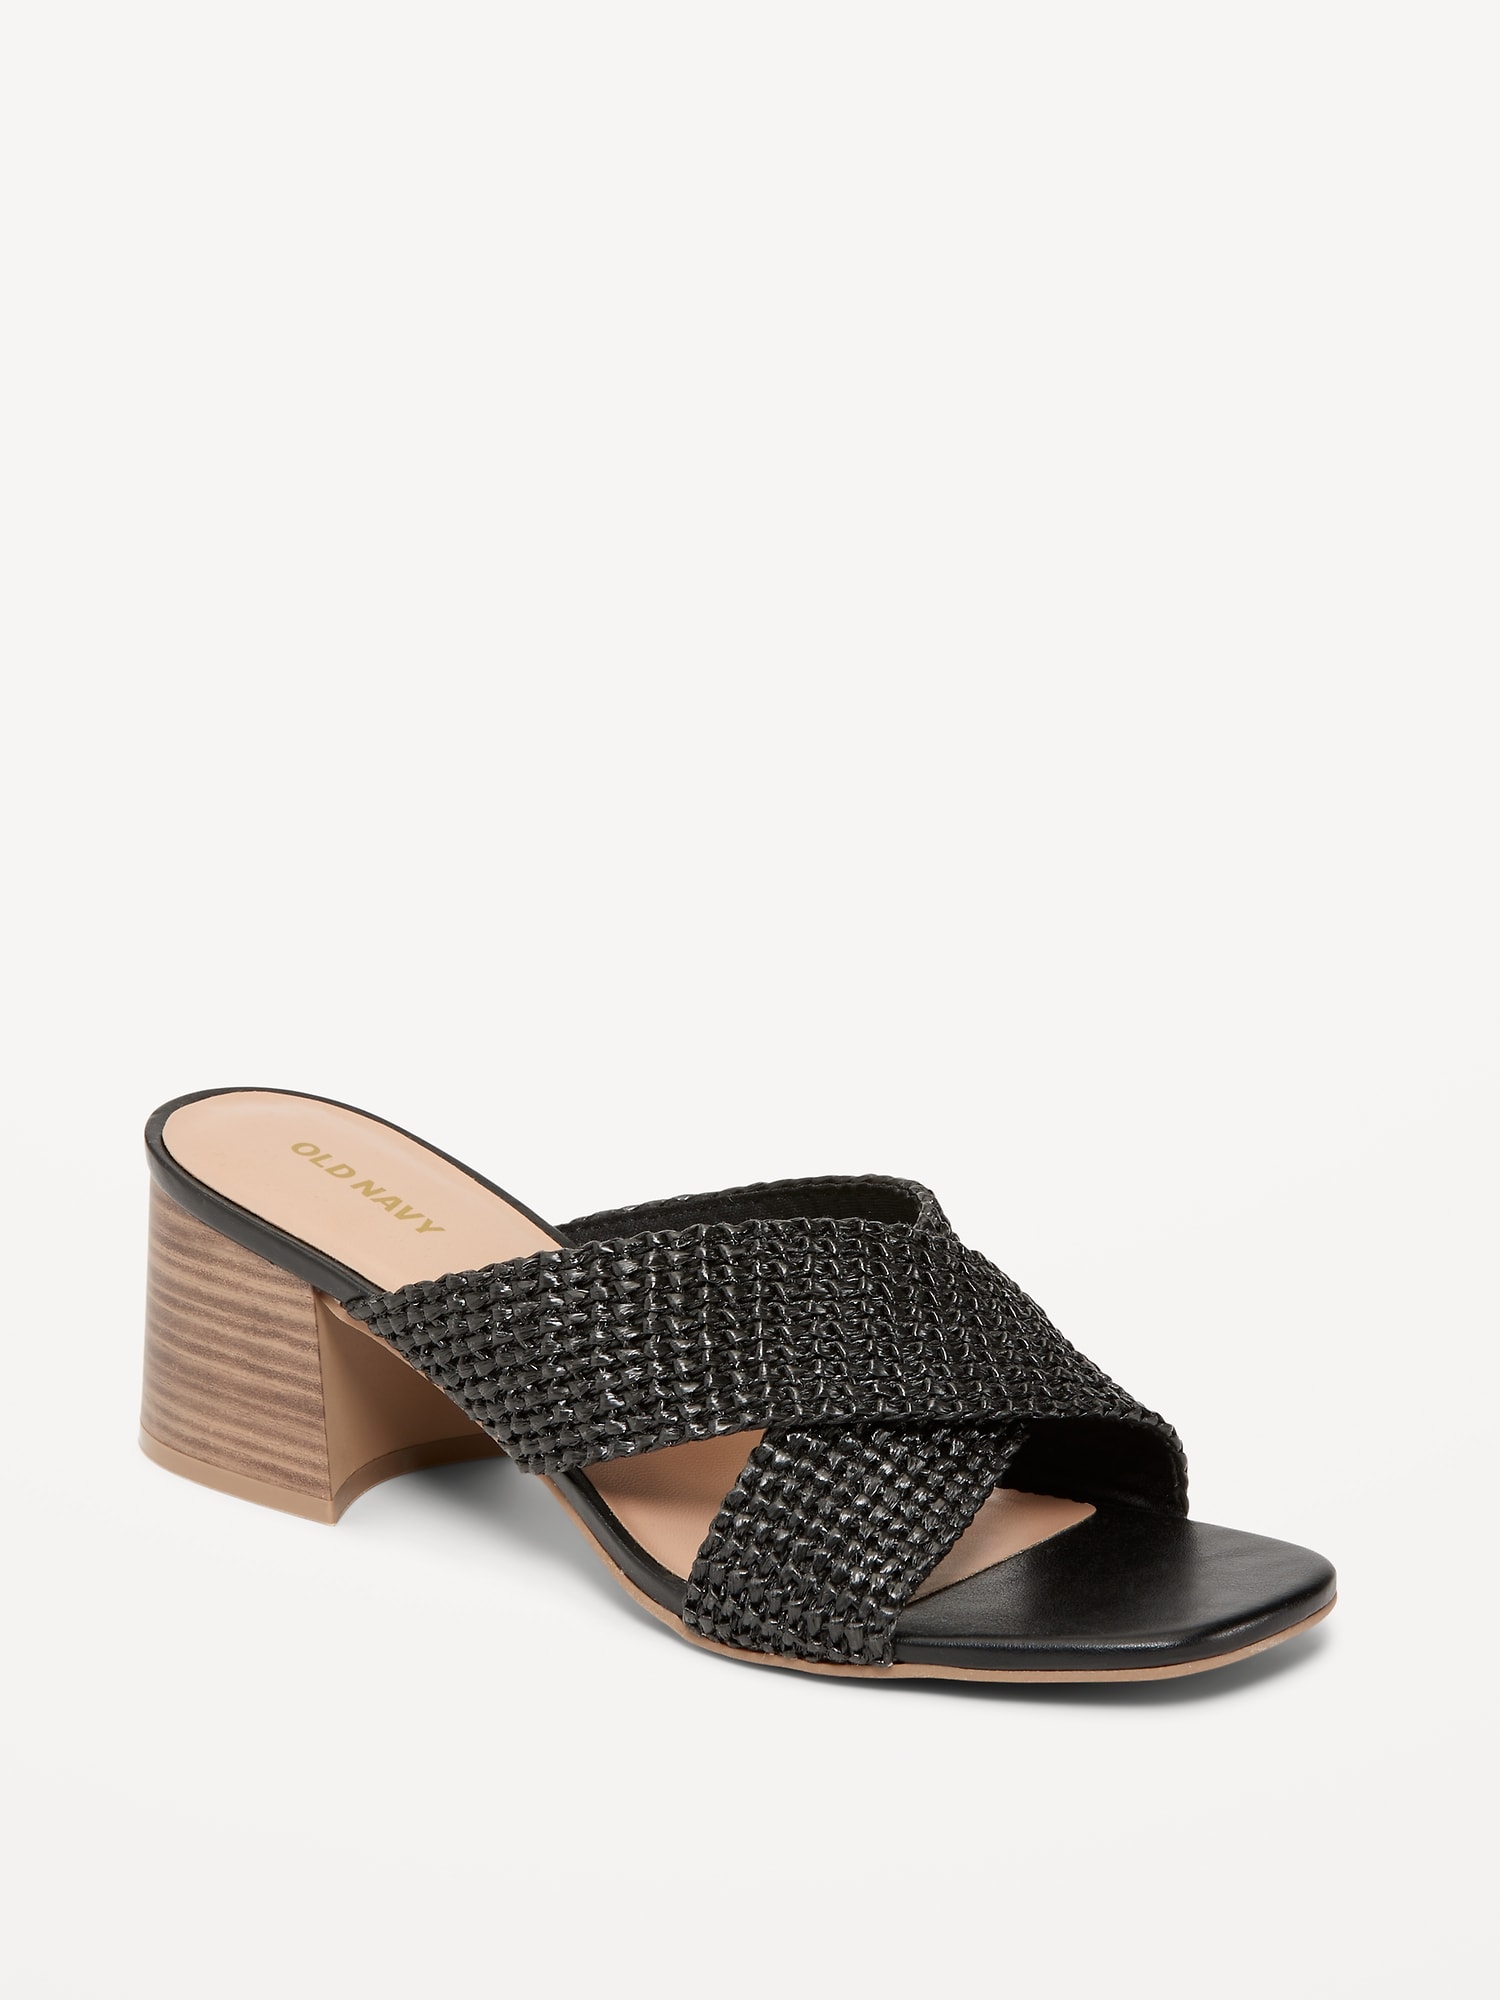 Old Navy Square-Toe Braided Straw Cross-Strap Mule Sandals for Women black. 1